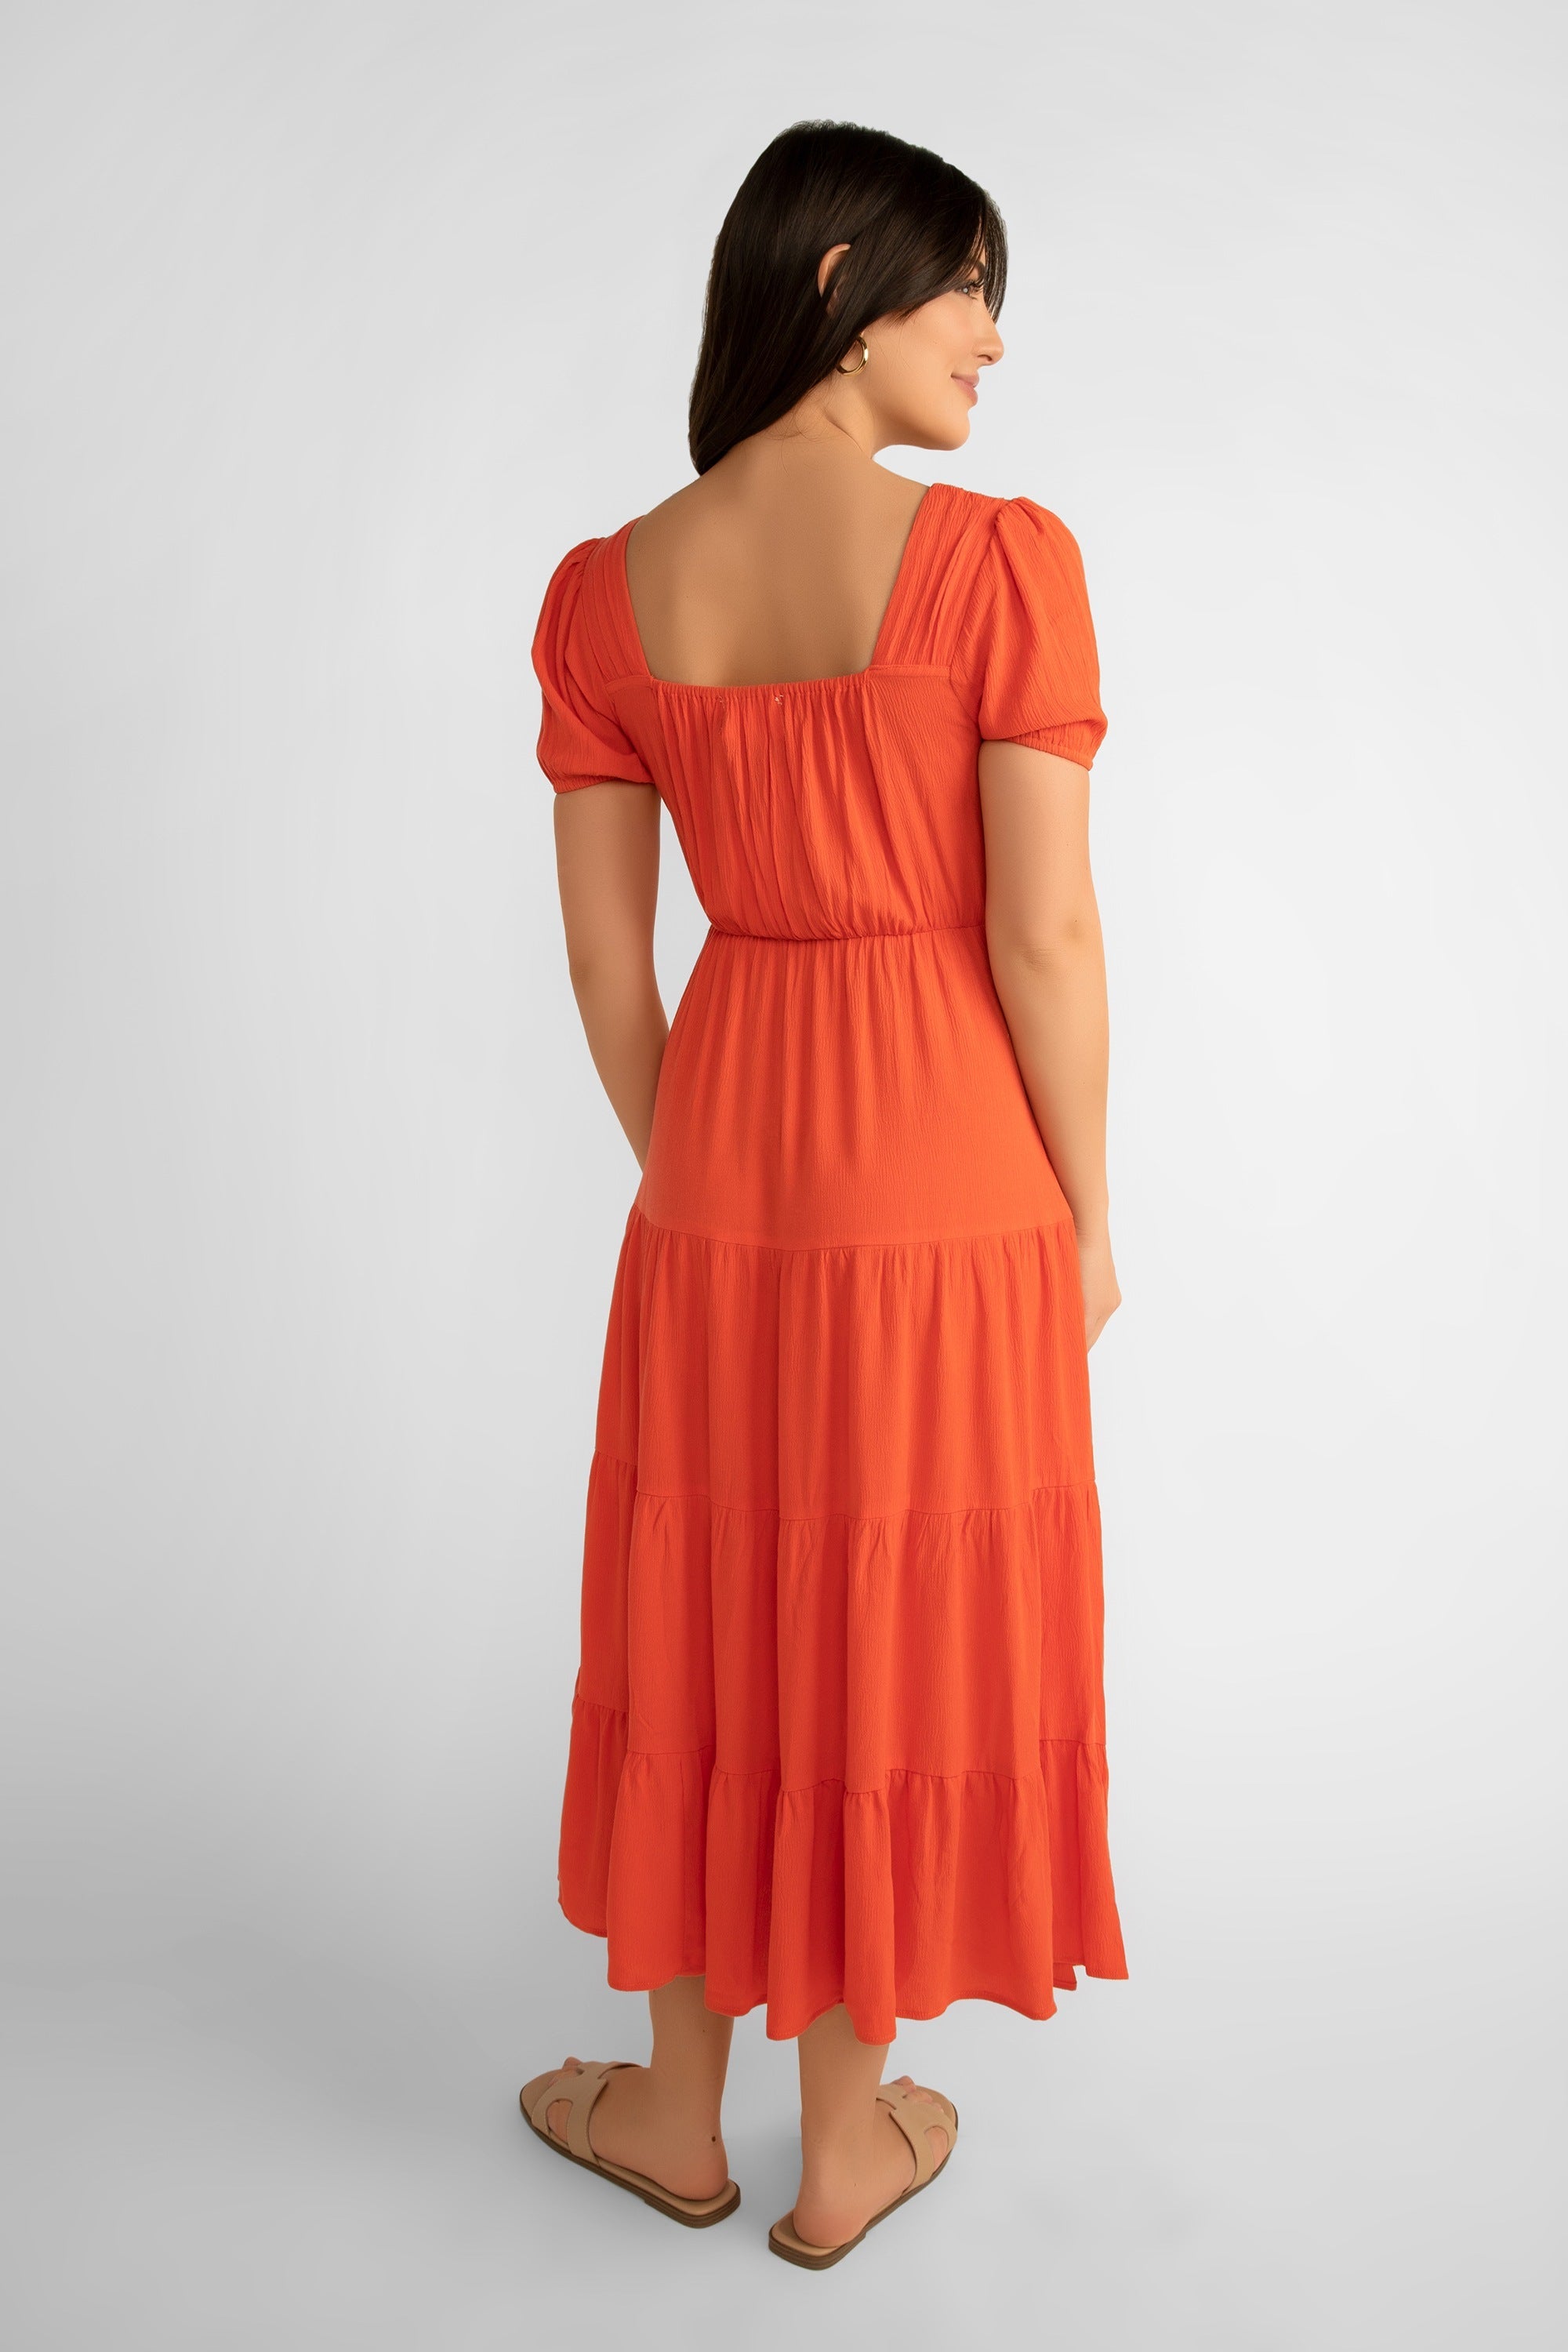 Back view of Pink Martini (DR-230524) Women's Square Neck, Short Puff Sleeve Tiered Midi Dress in Orange